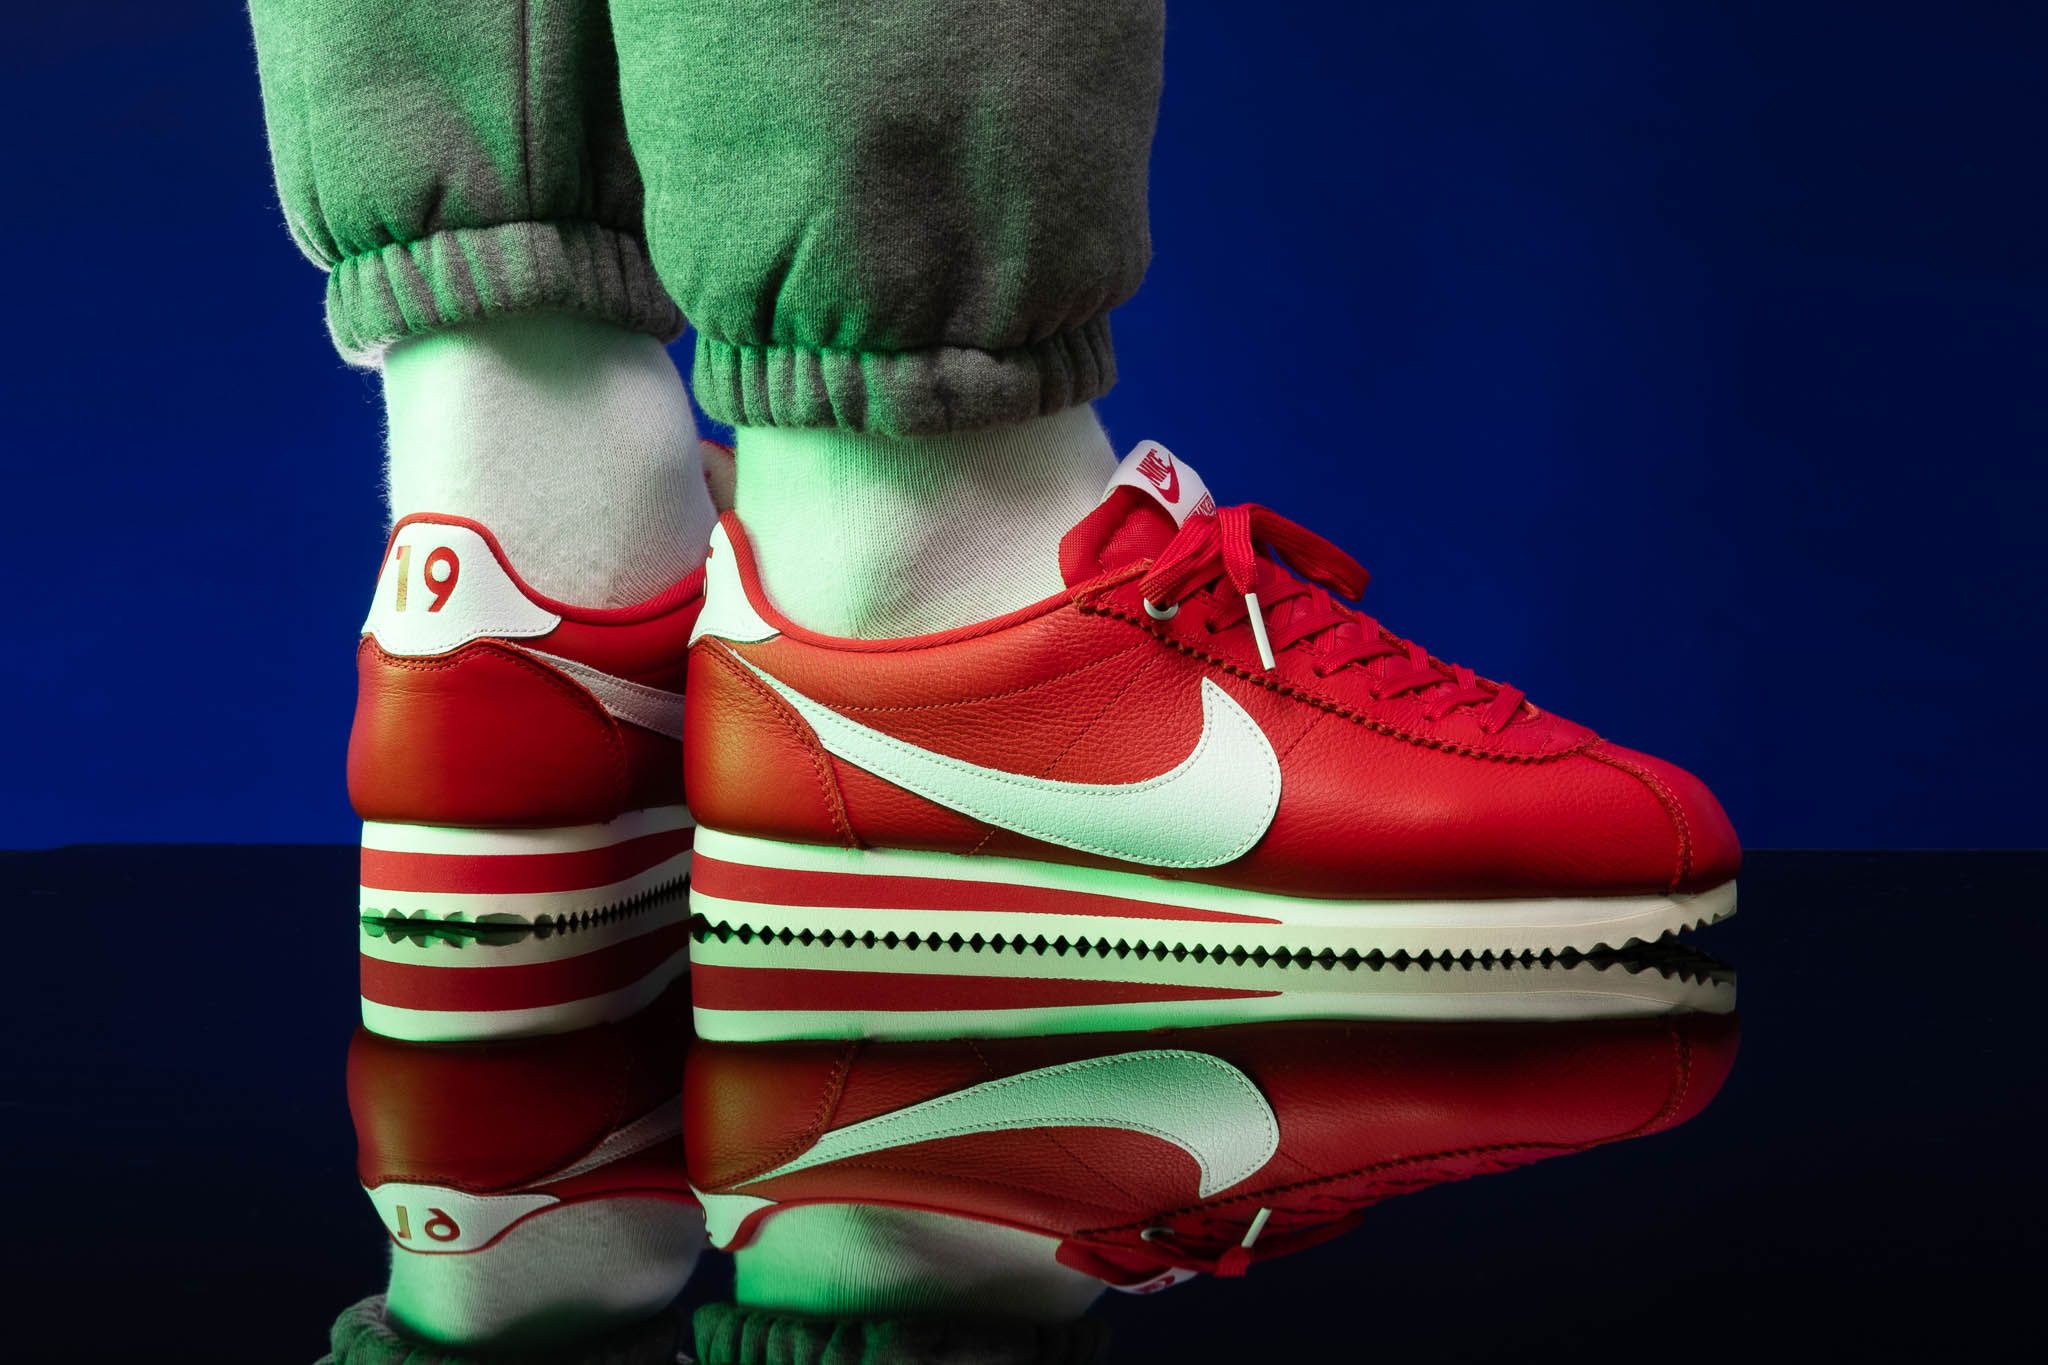 Titolo on Twitter: "OUT NOW 🔥🔥🔥 Things x Nike Cortez "University Red/White" don't on these ➡️ https://t.co/mTzxlEbb1E sizerun 🏃🏻 US (37.5) - US 11 (45)⁠⠀⁠ style code 🔎 CK1907-600⁠ #